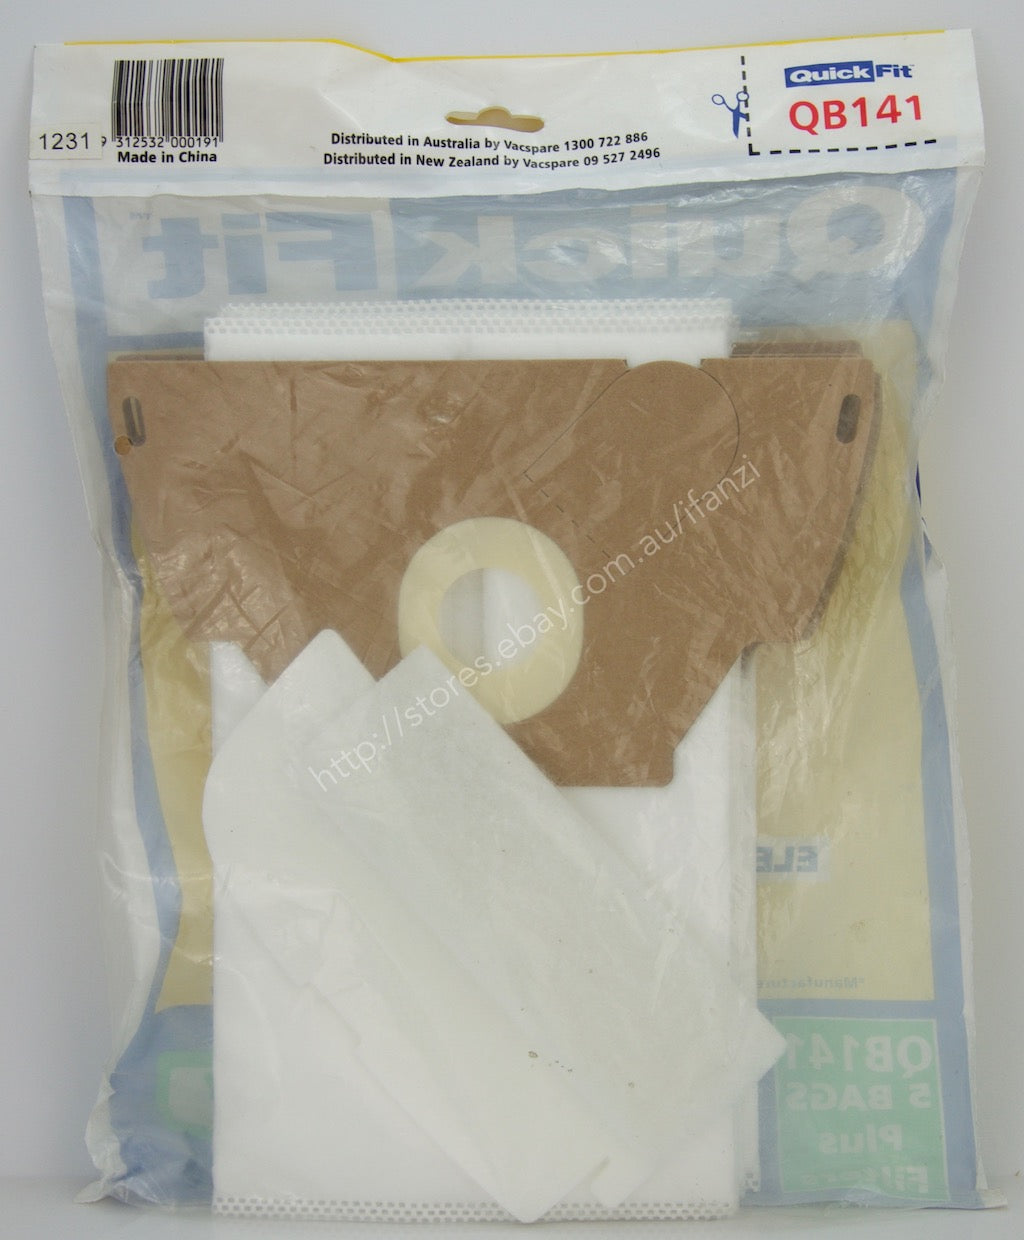 QuickFit Vacuum Cleaner Bags For Electrolux 5 Bags With Filter QB141